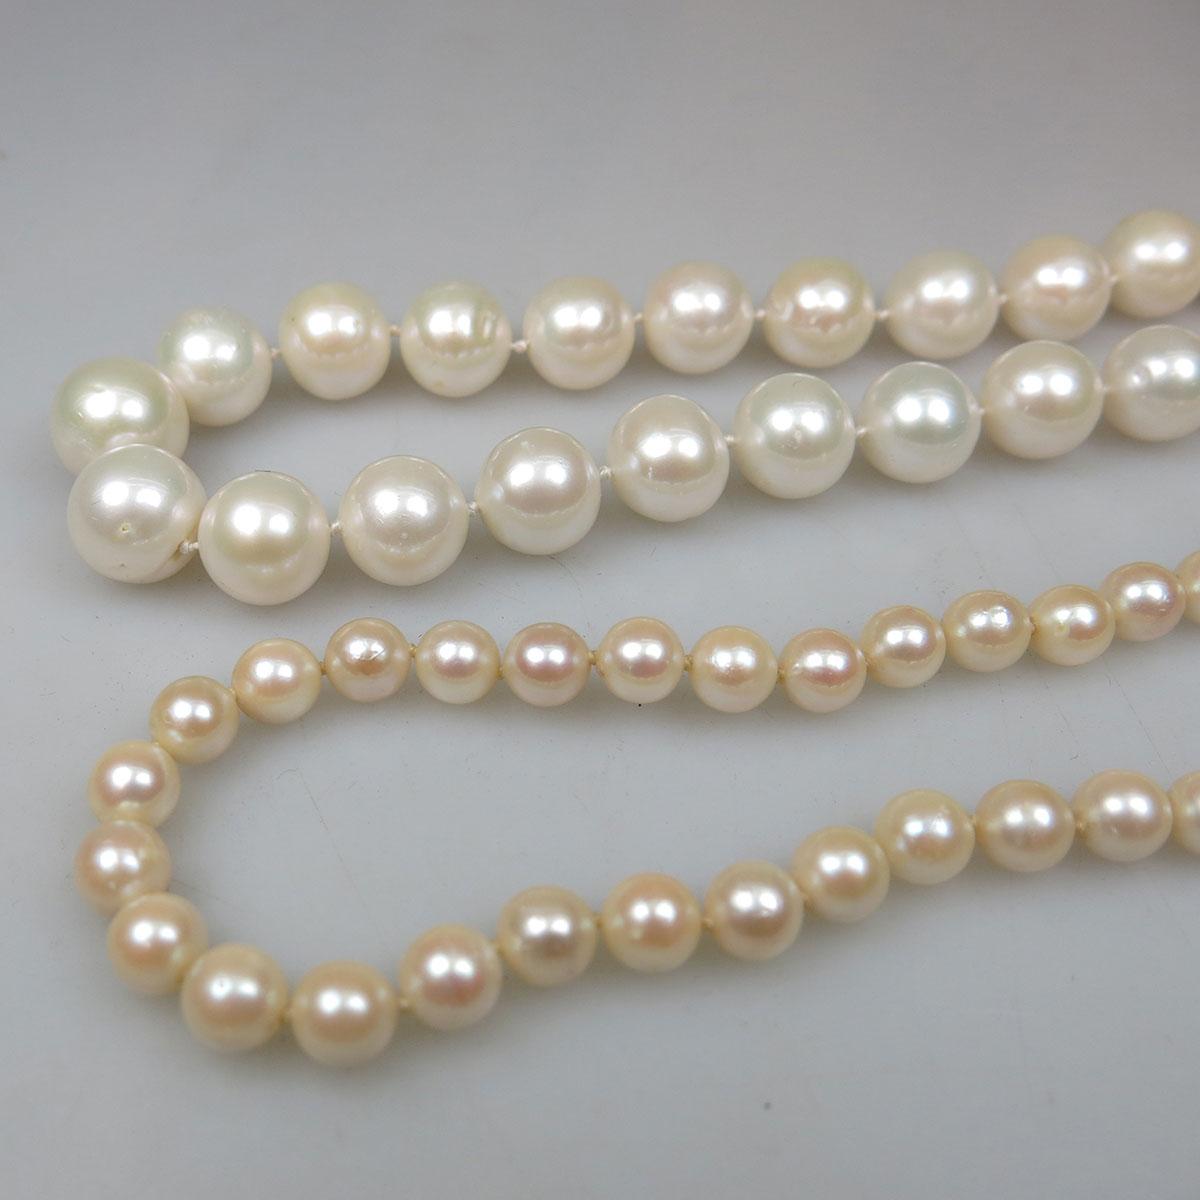 Single Strand Of Freshwater Pearls